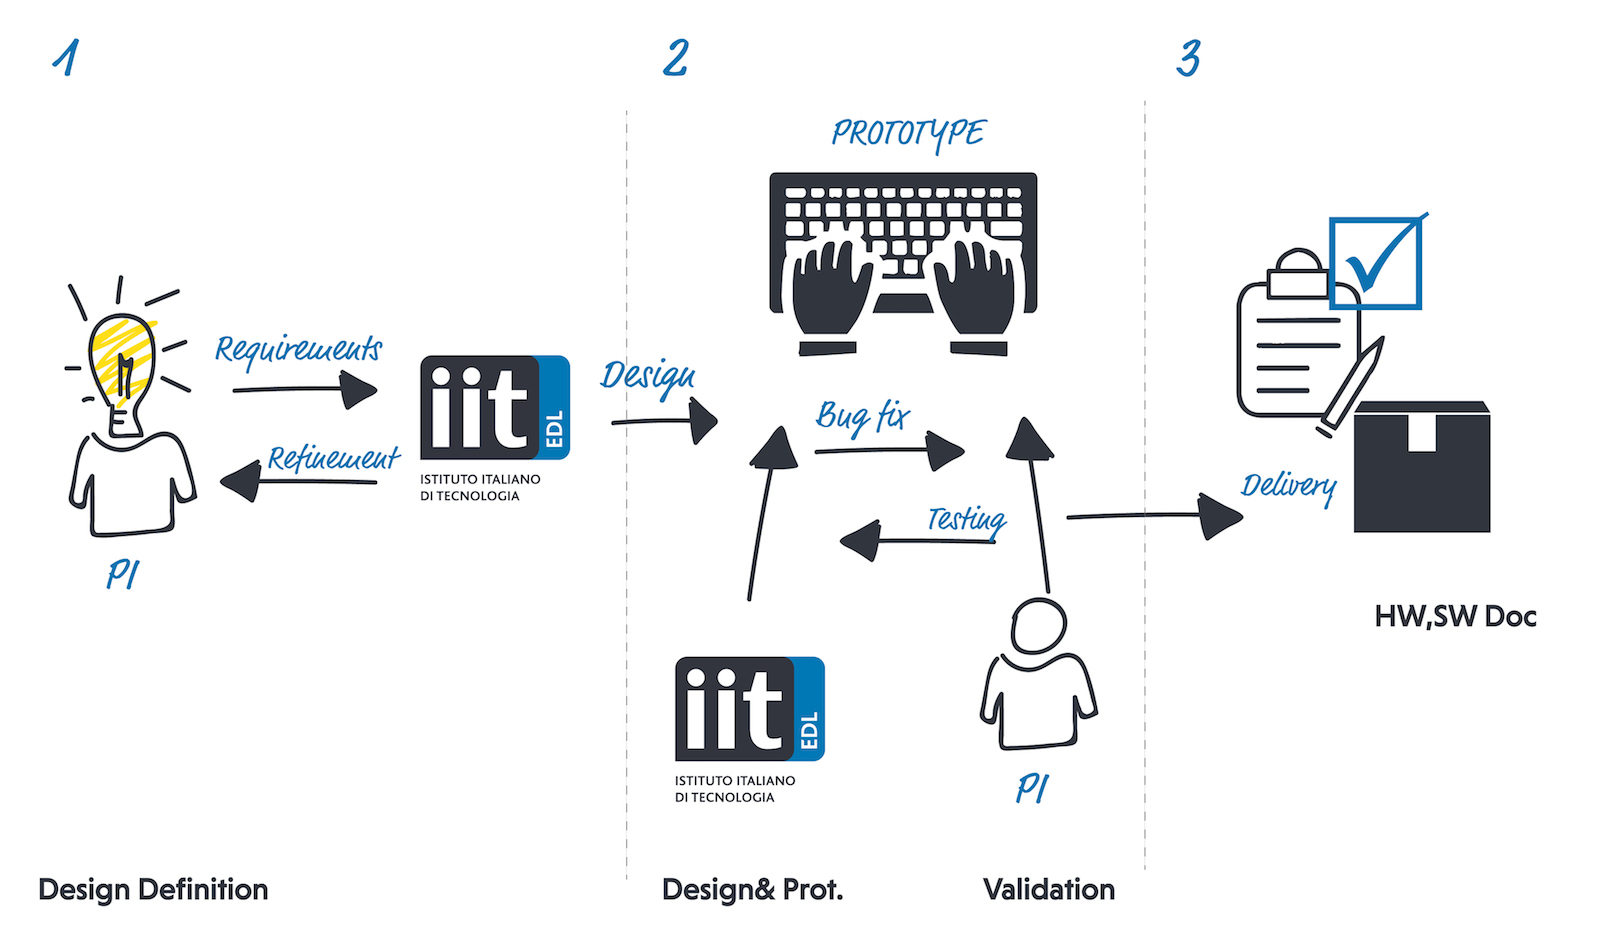 Typical EDL flow for the design of electronic embedded systems in cooperation with the customer PI.